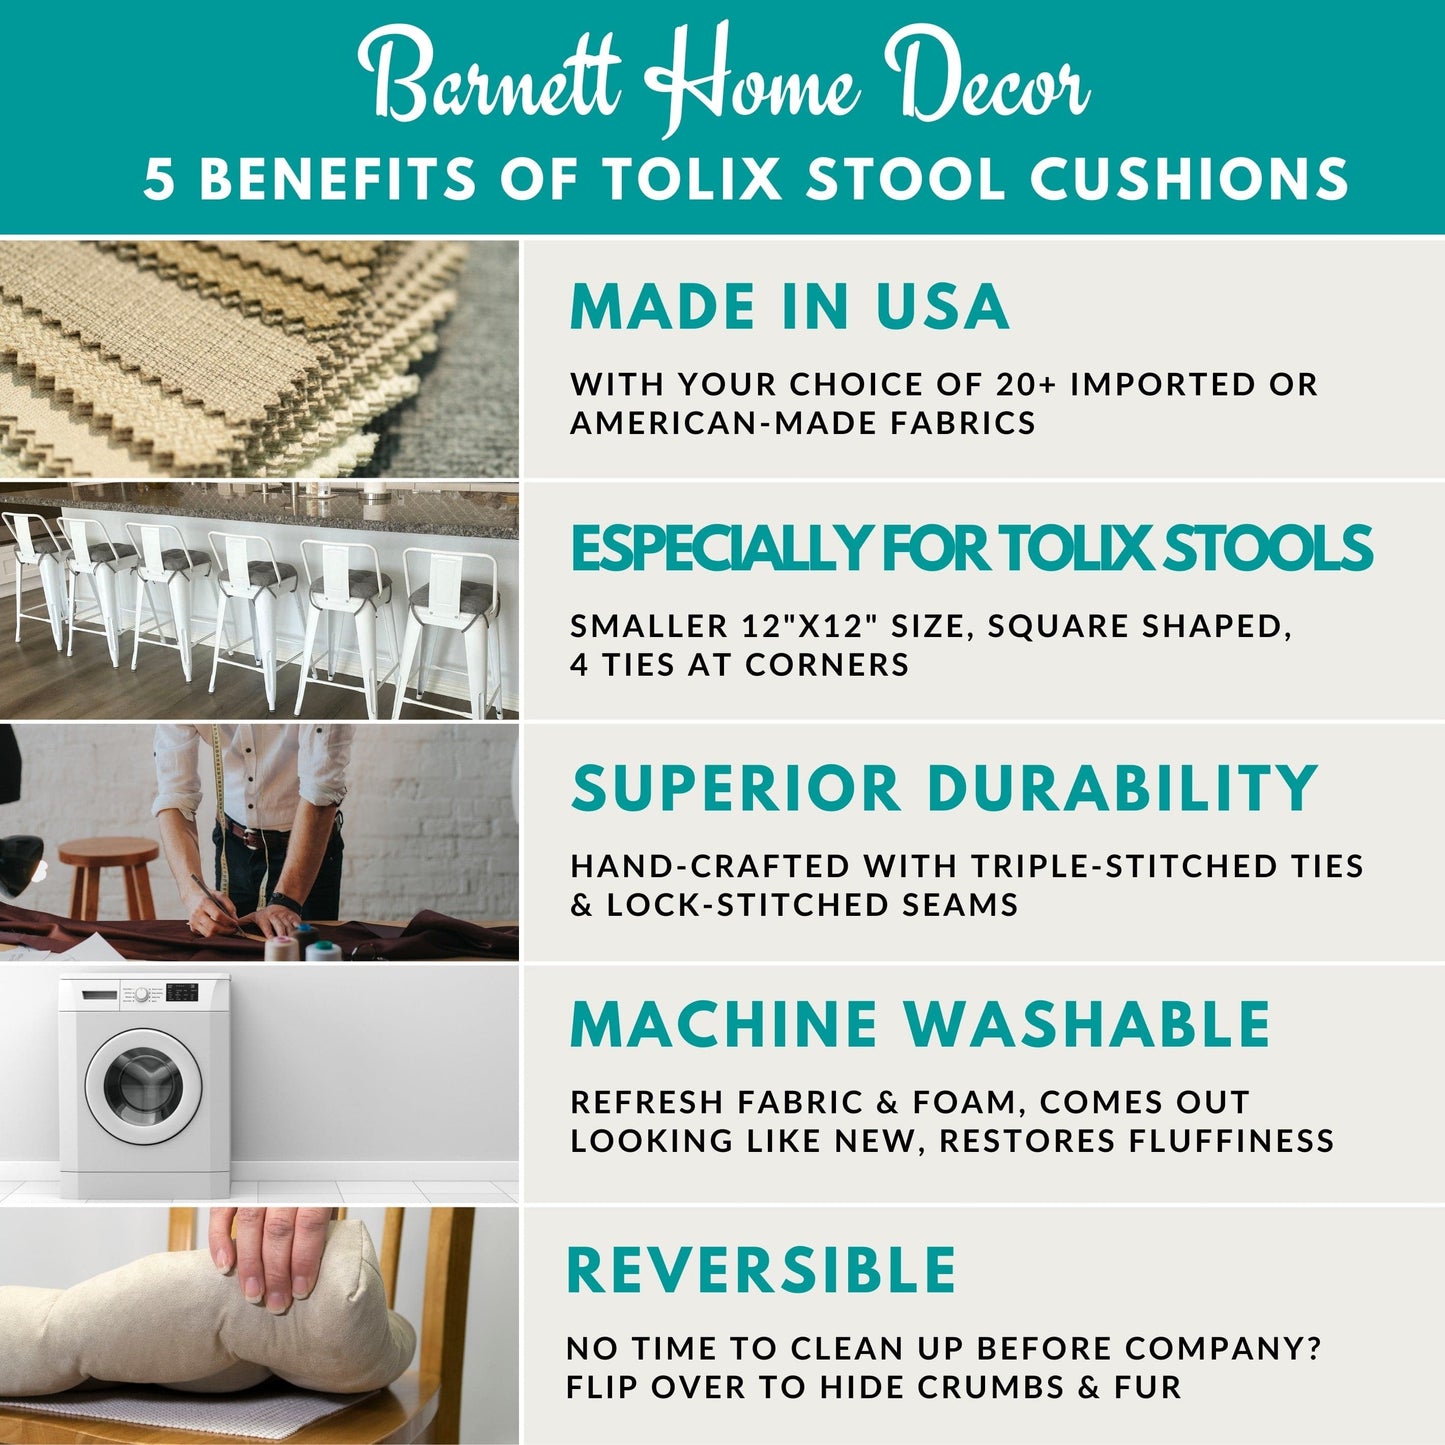 Barnett Home Decor Benefits of Tolix Stool Cushions, Made in USA, Made for Tolix Stools, Superior Durability, Machine Washable, Reversible 